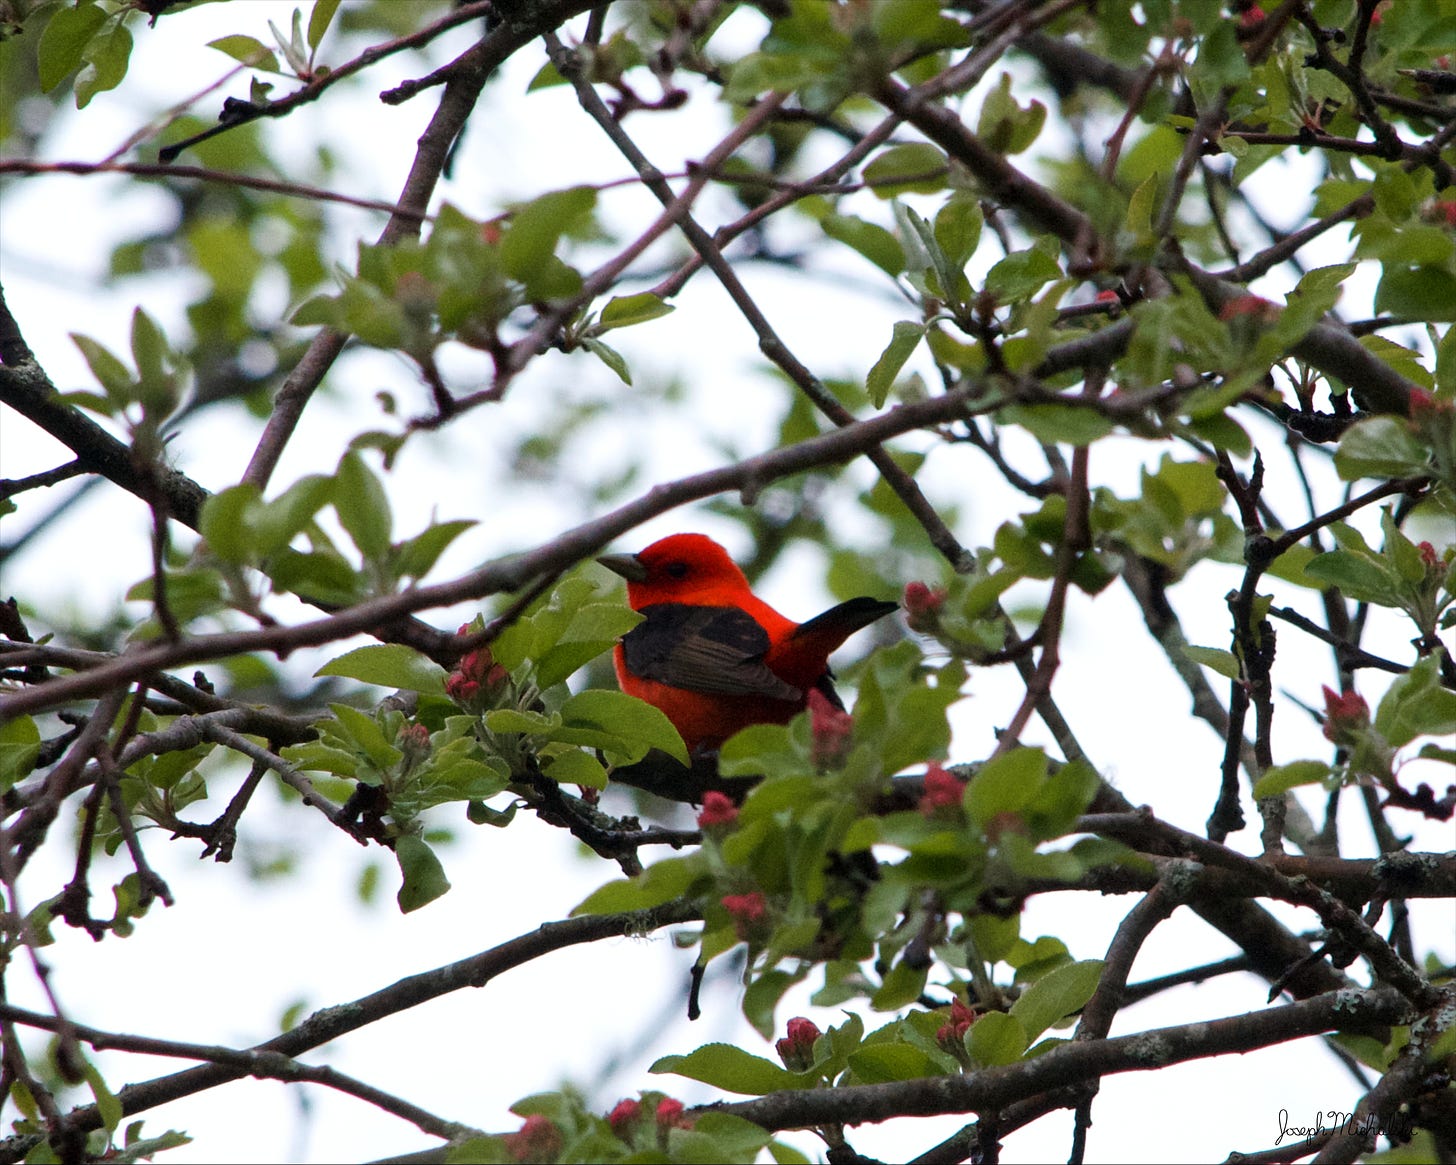 A Scarlet Tanager perches among the pink flower buds of a wild apple tree.